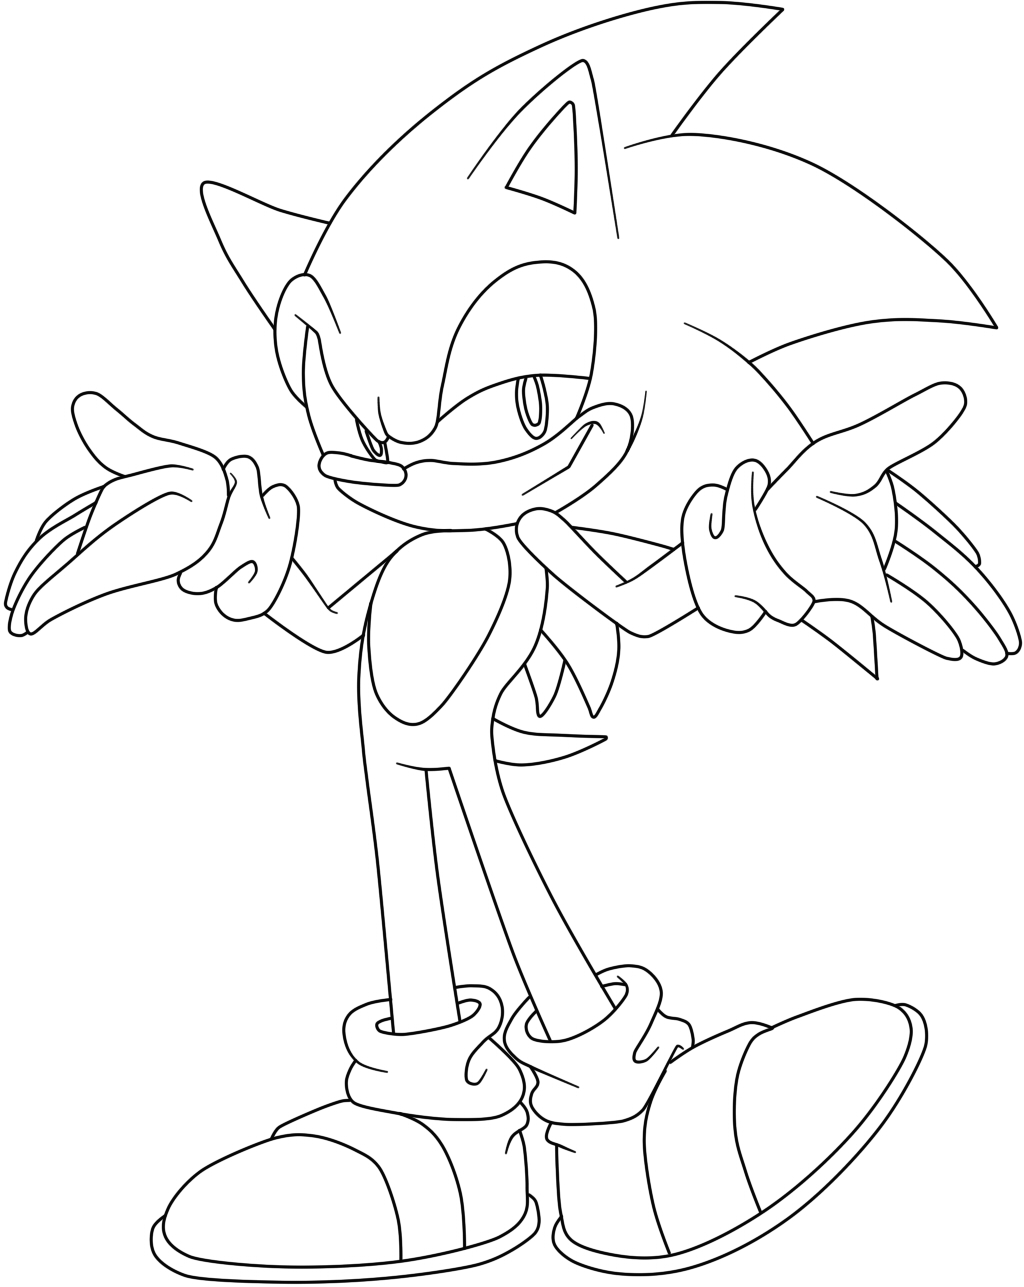 Sonic The Hedgehog Lineart by E-M-E-R-L on DeviantArt